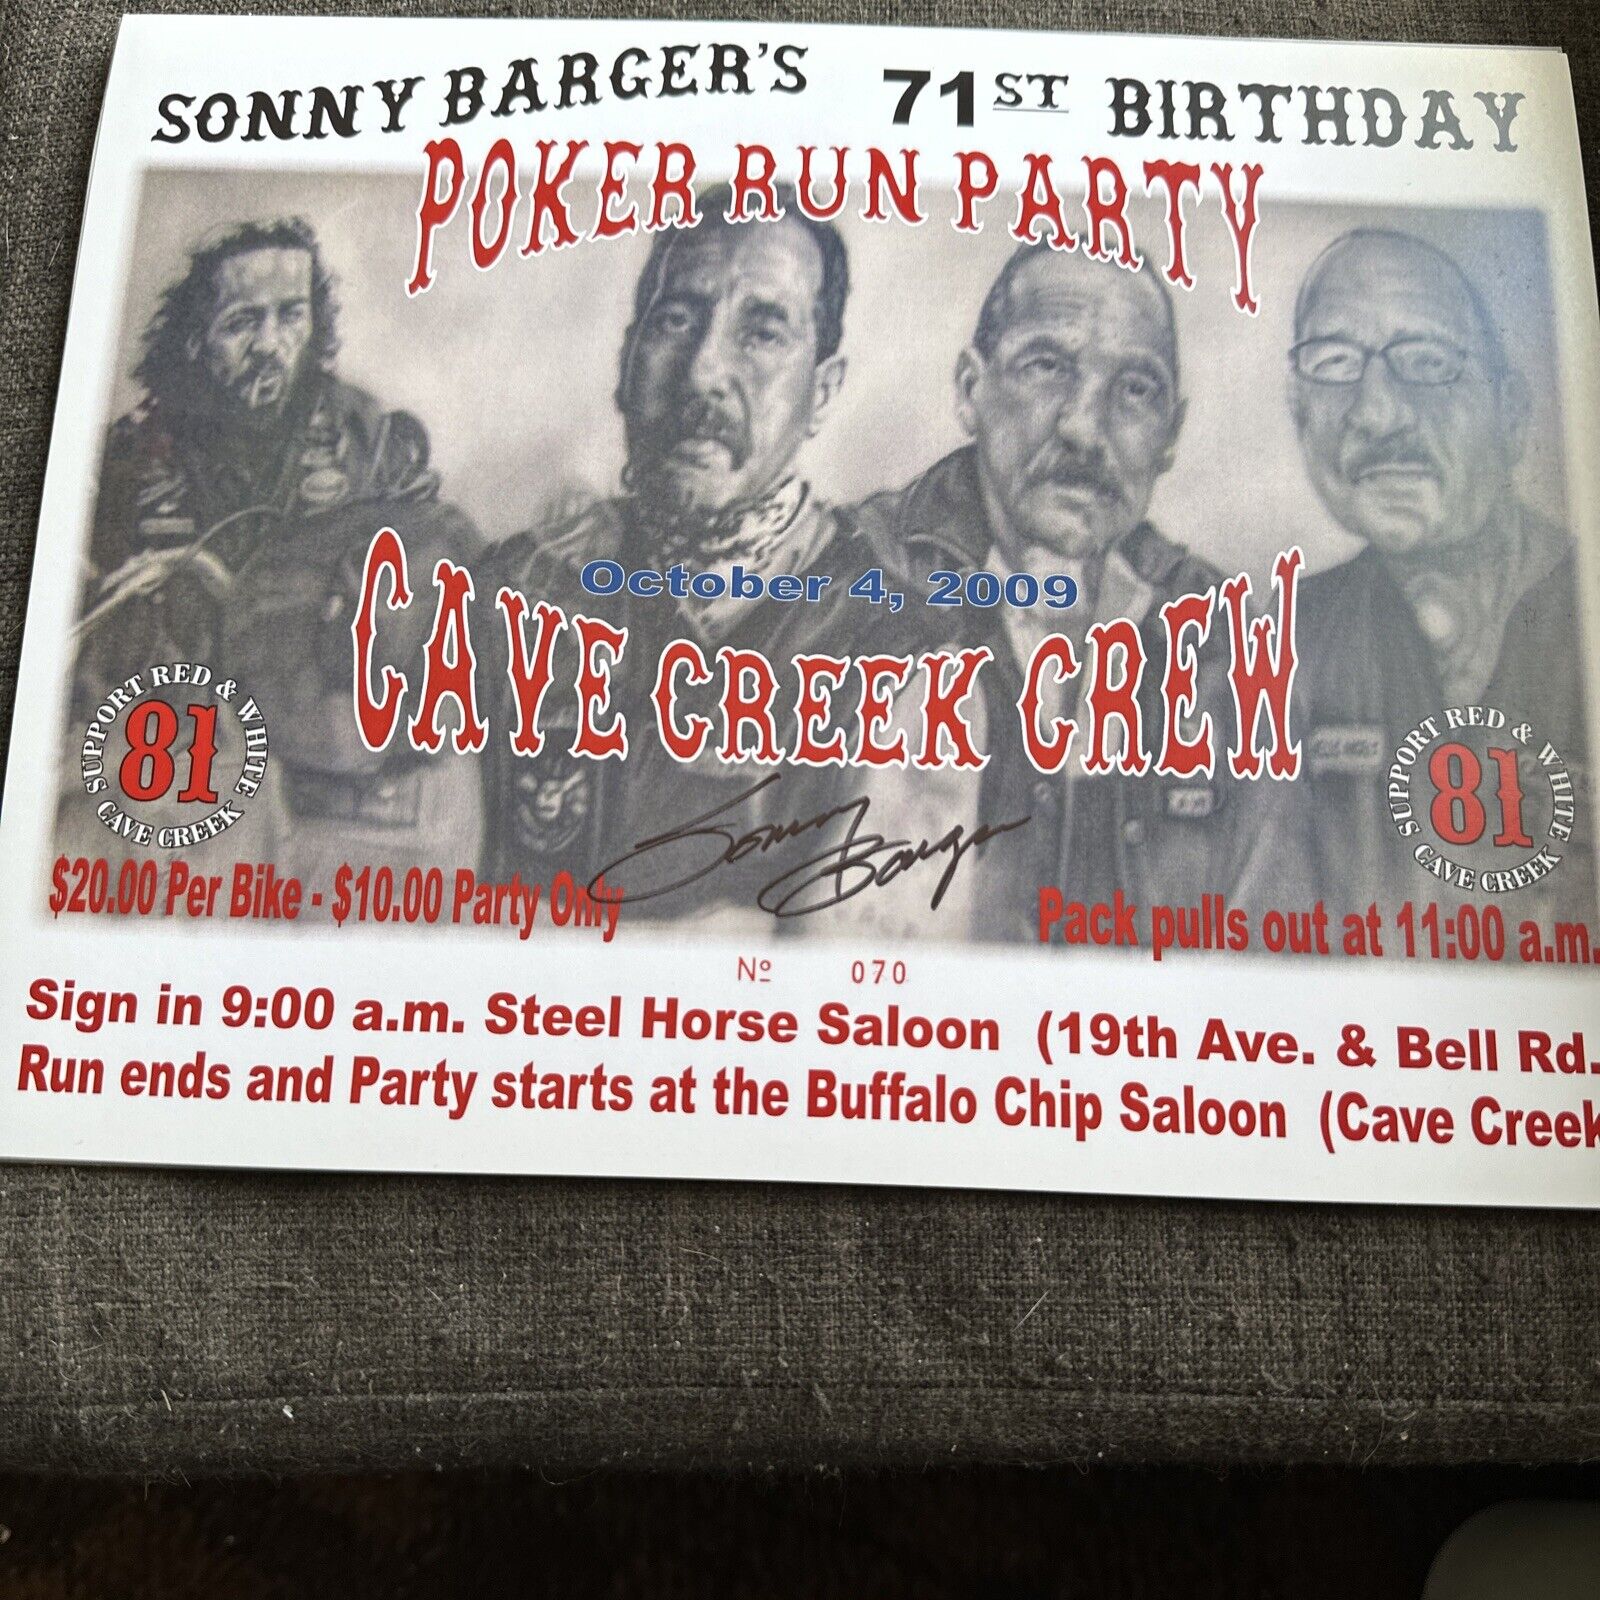 Sonny Barger Hells Angels  Signed This Poster From His 71st Birthday. Number 70